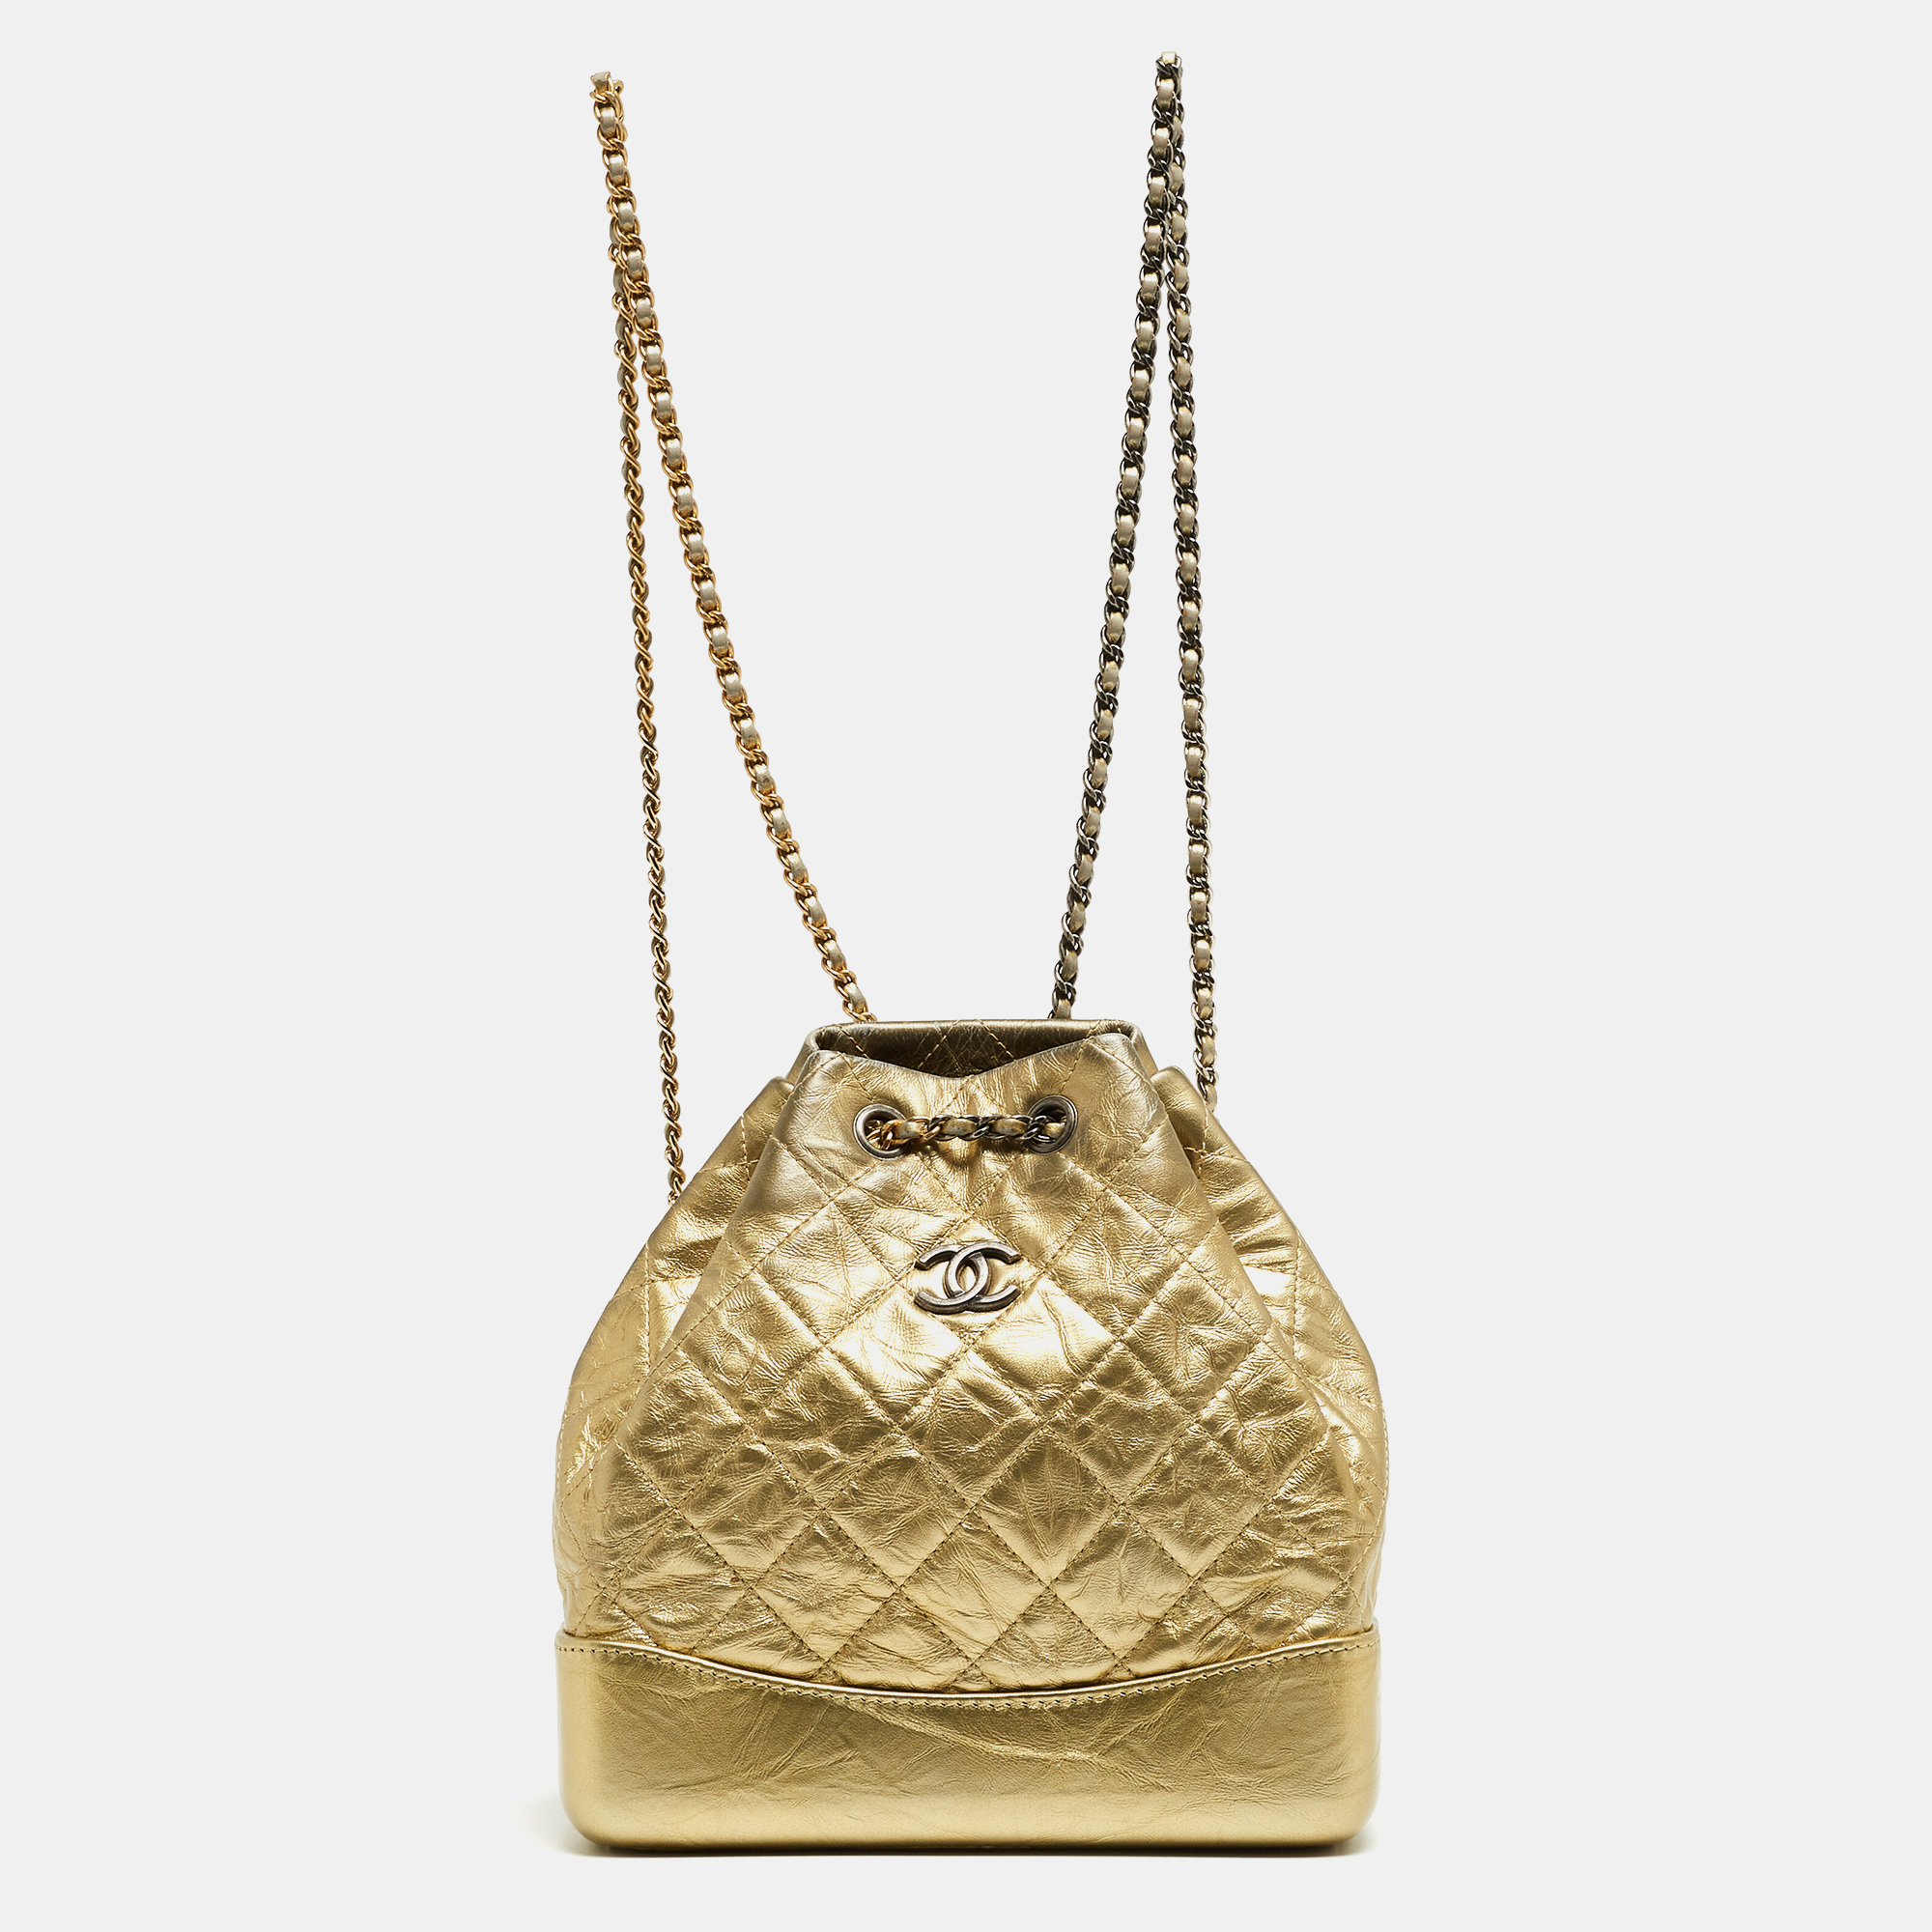 Chanel gold quilted leather small gabrielle backpack